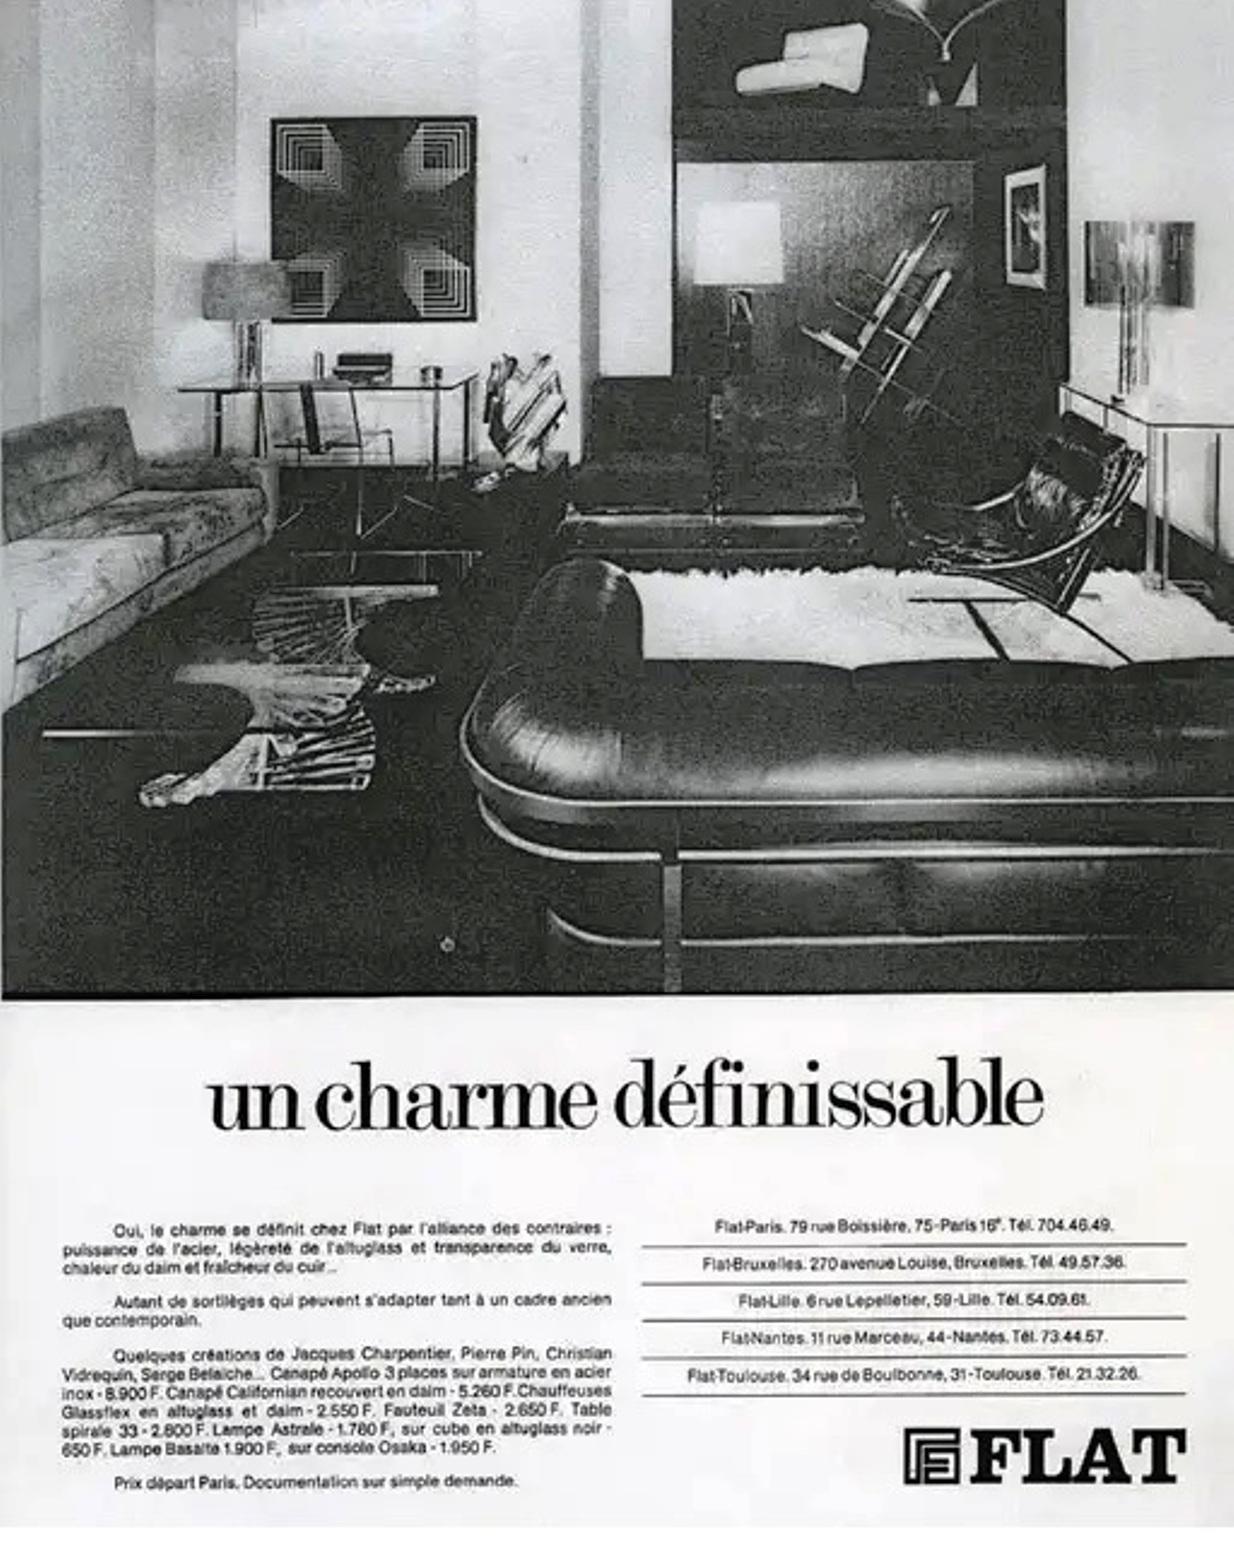 Pair of Two Seat Mohair 'California' Sofas, Jacques Charpentier, Paris, 1970 For Sale 5